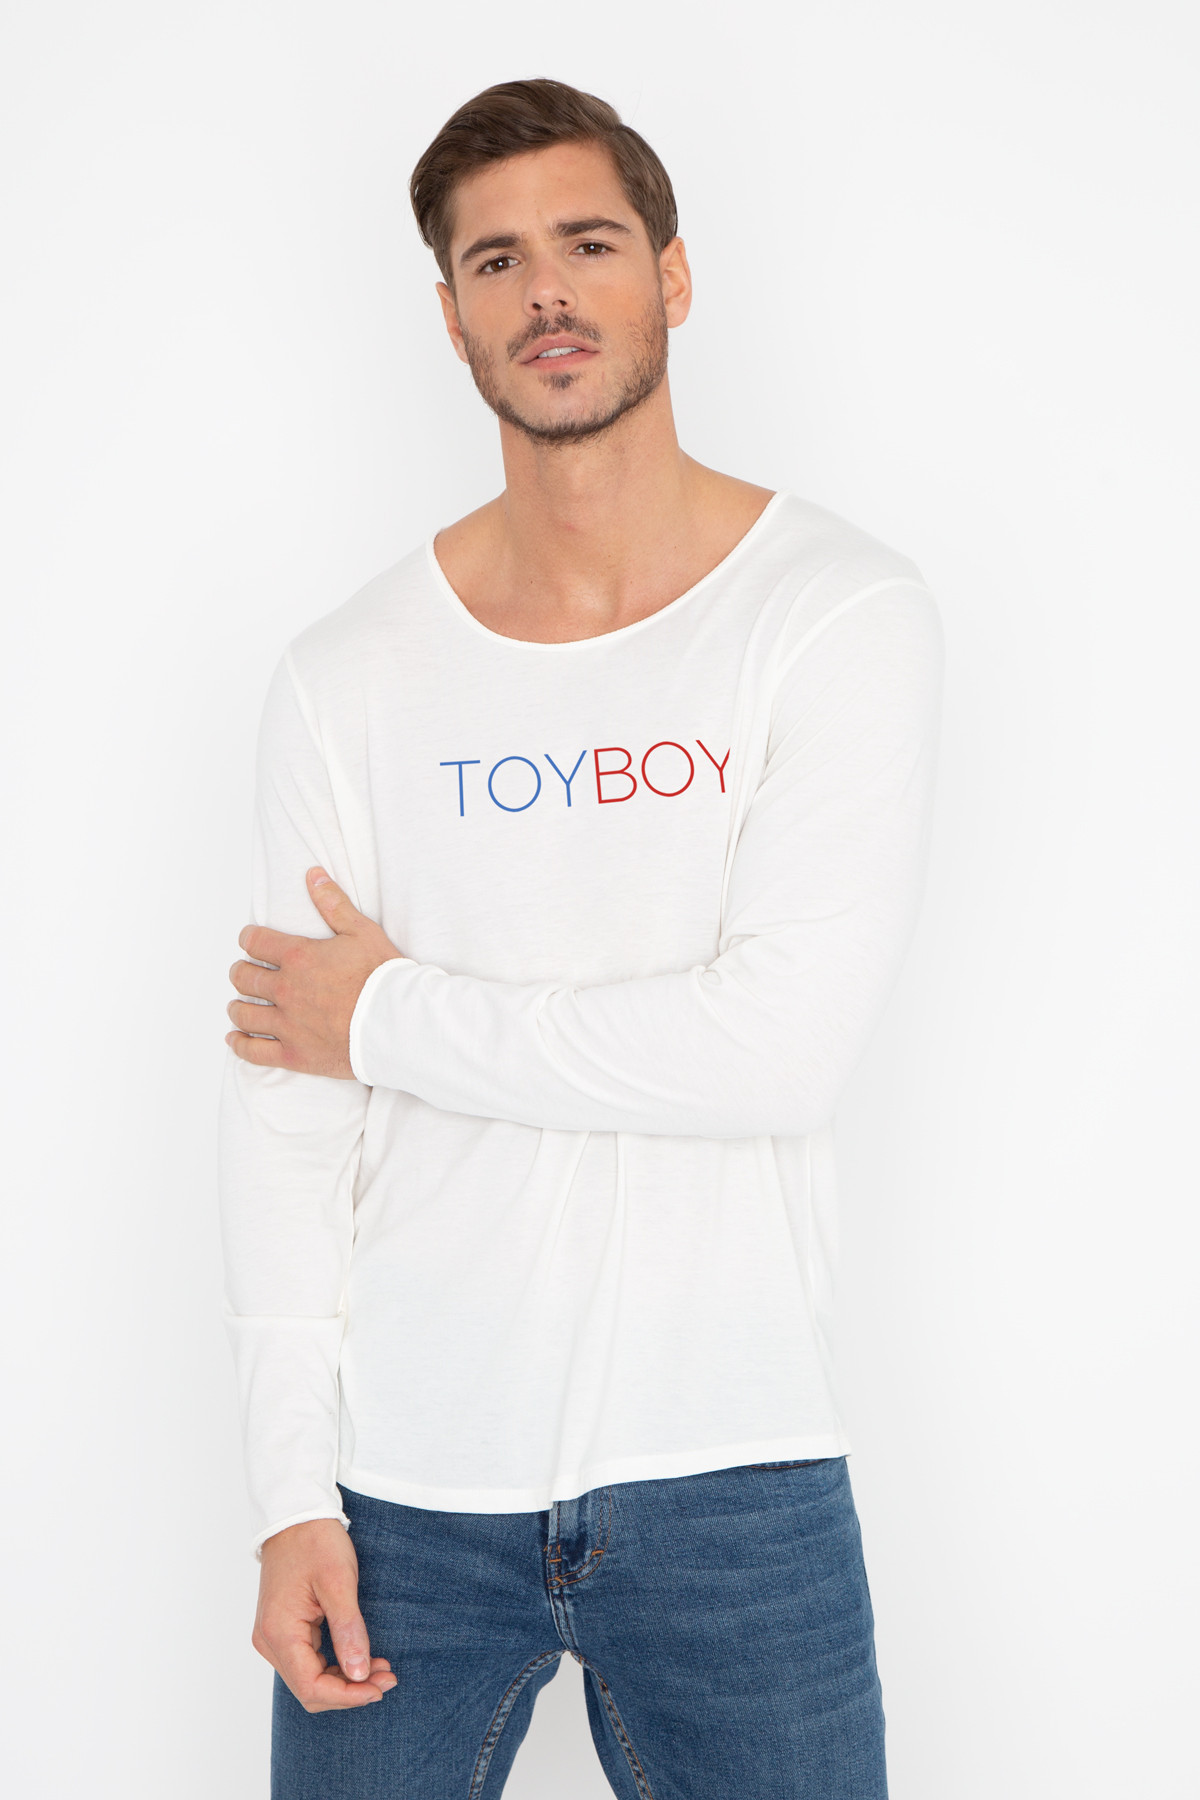 Photo de Anciennes collections homme Tshirt Percy TOY BOY chez French Disorder